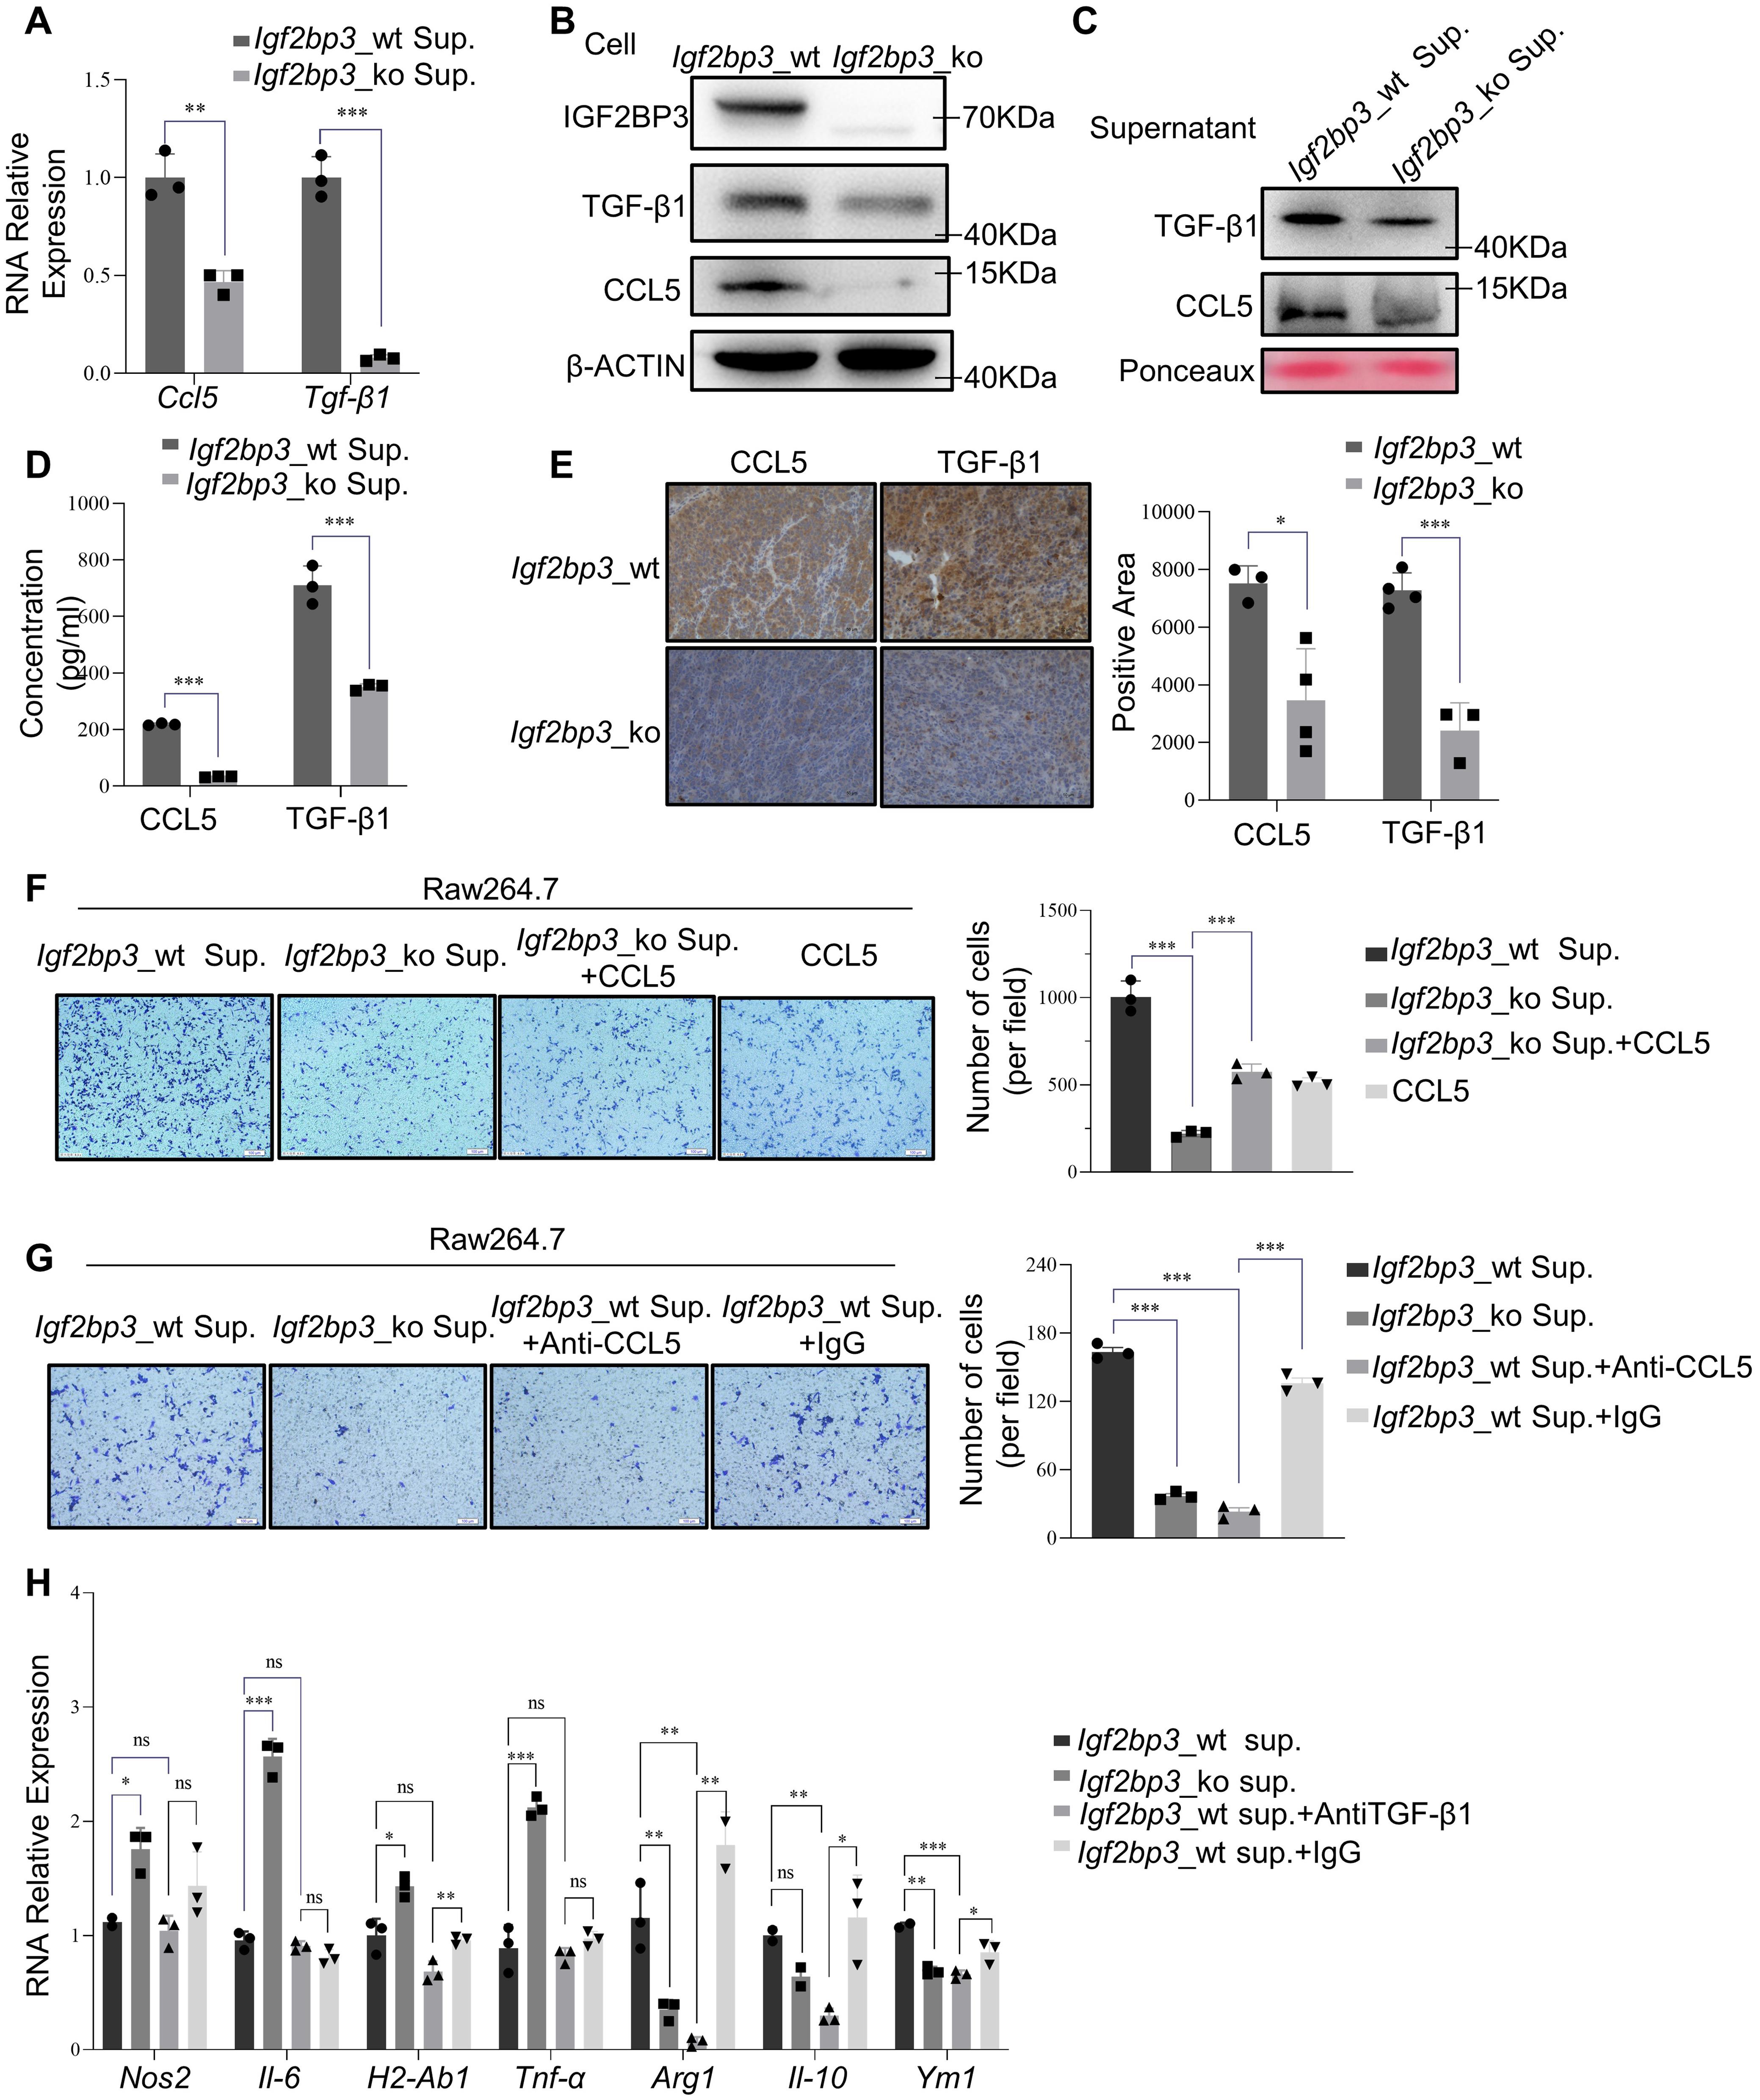 IGF2BP3 facilitates macrophage infiltration and polarization by promoting the secretion of CCL5 and TGF-β1 from tumor cells.